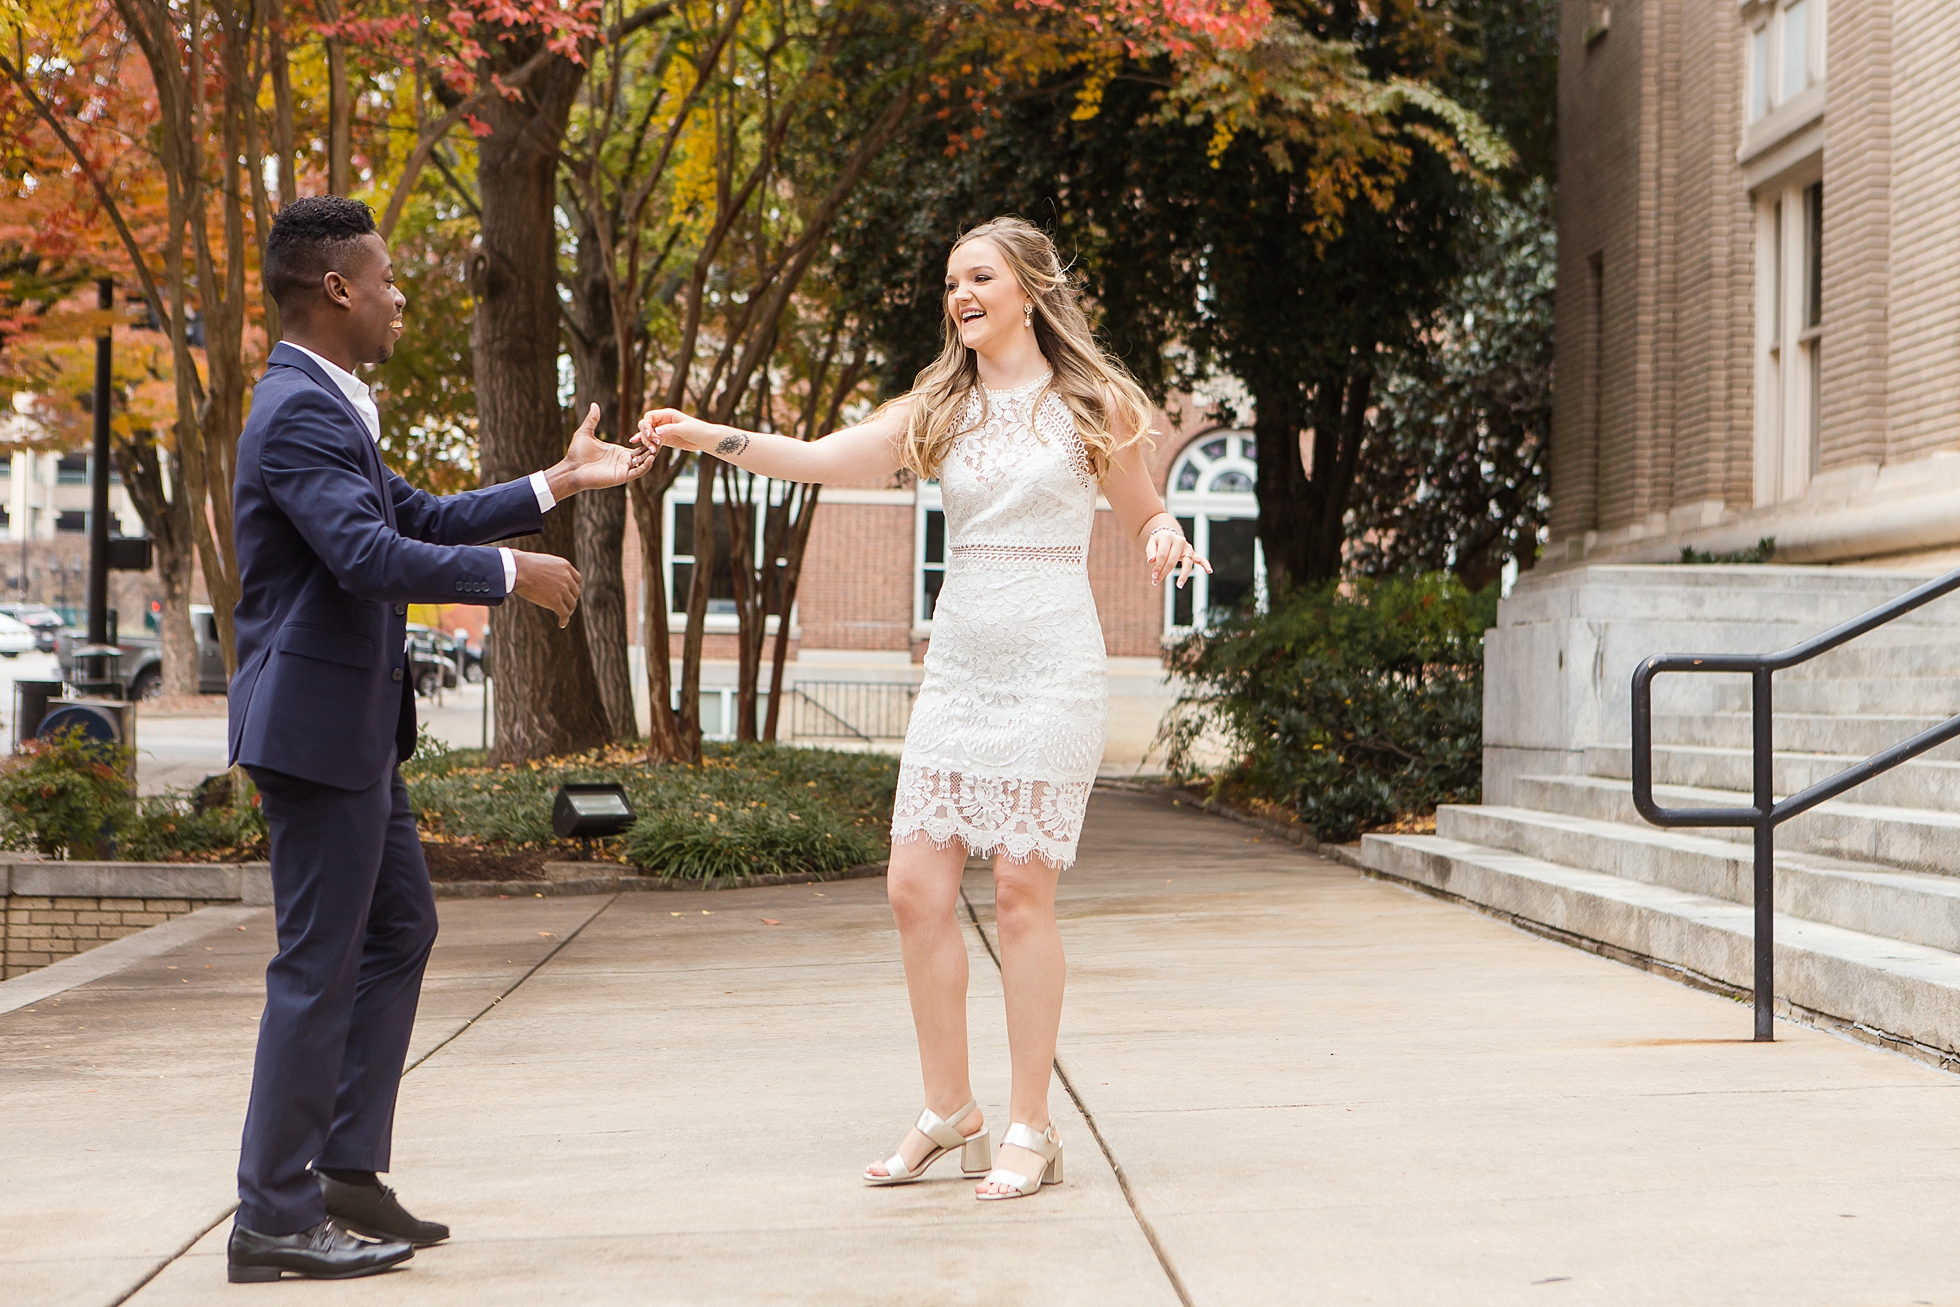 dancing engagement courthouse wedding